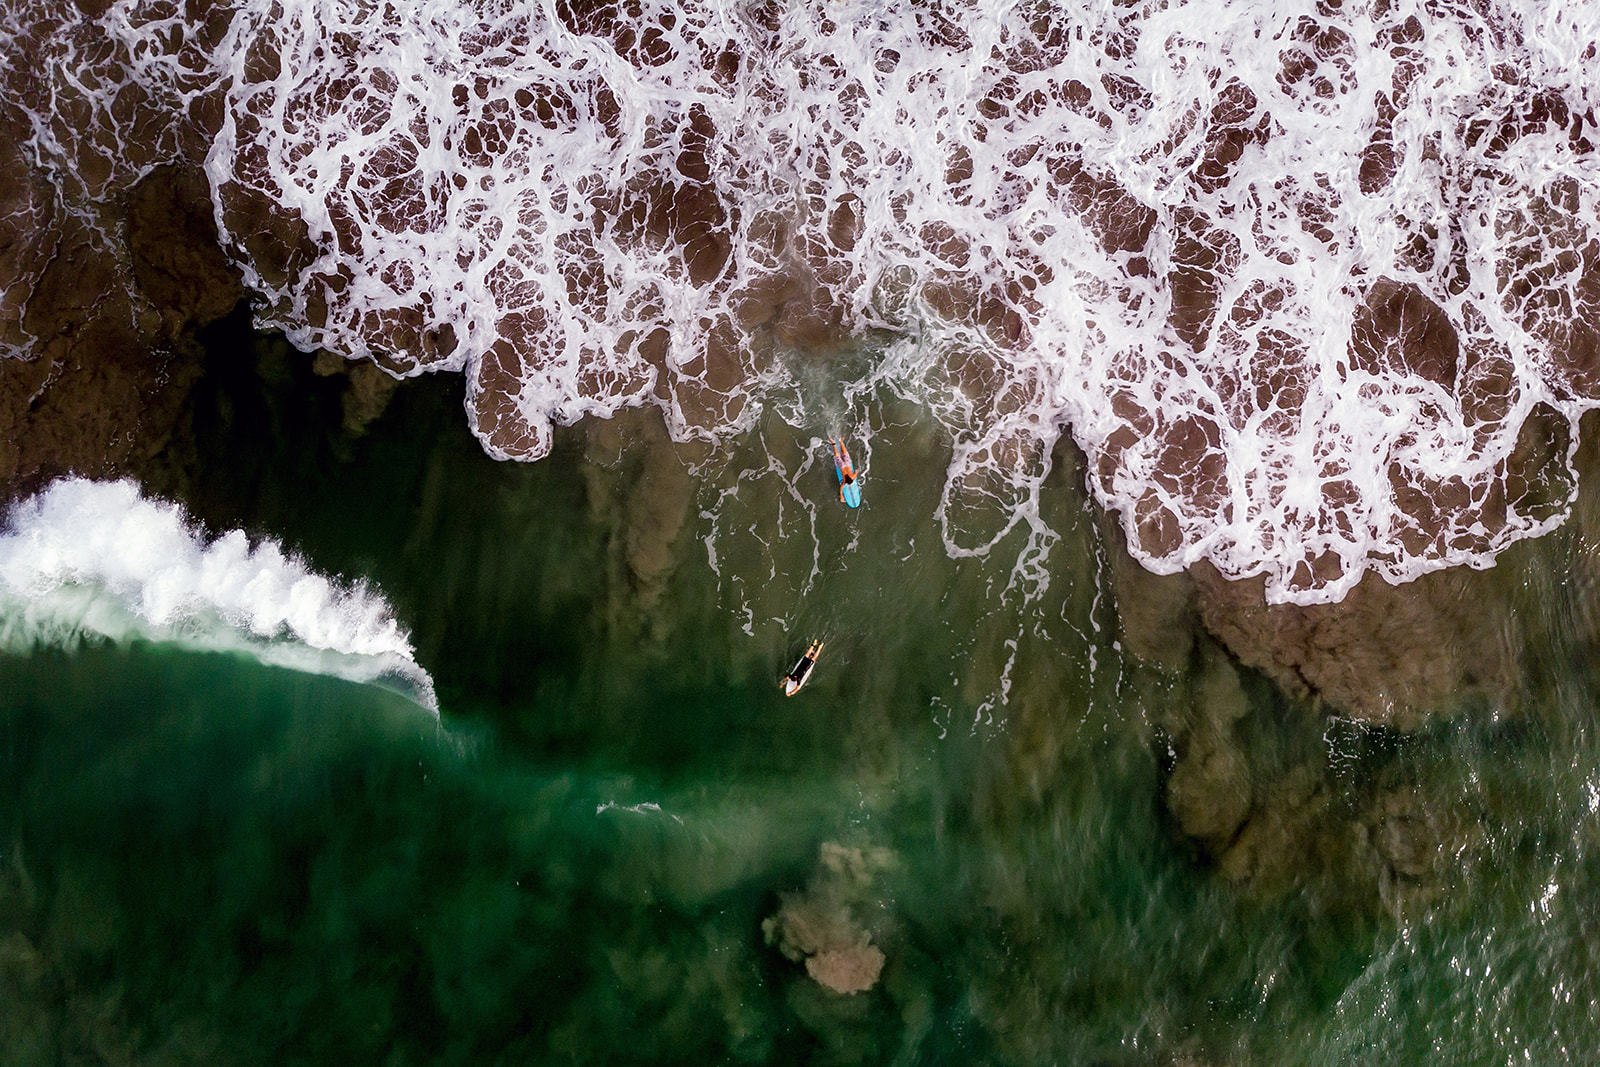 Surfers from above shot by drone